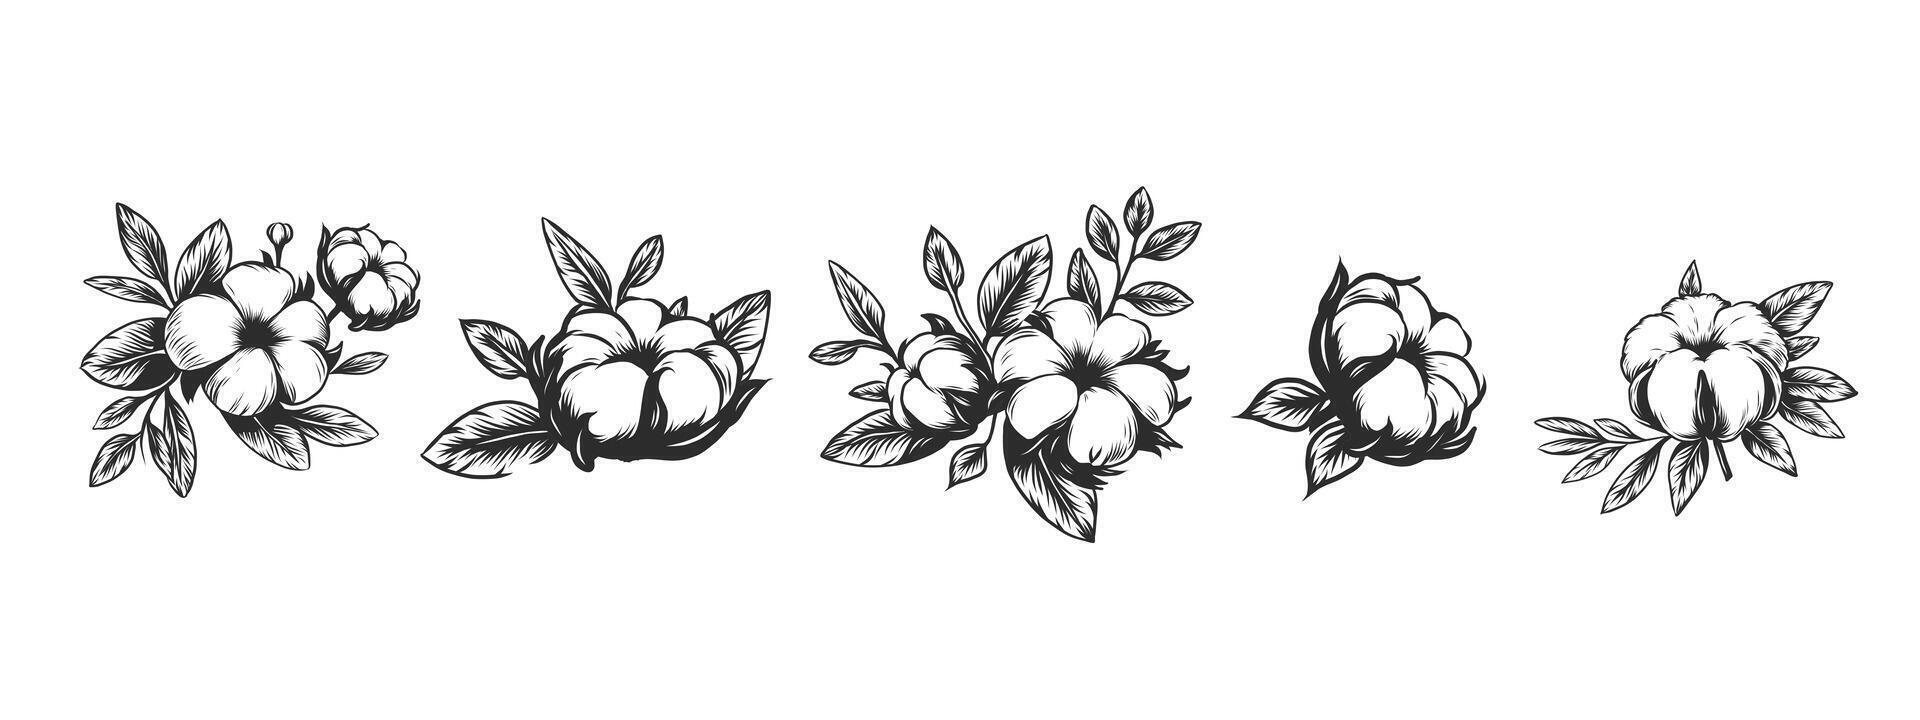 hand drawn ink cotton plant set. Engraving with cotton flowers for packaging design, background, texture, wrapper pattern, frame or border. Monochrome black and white illustration isolated on vector